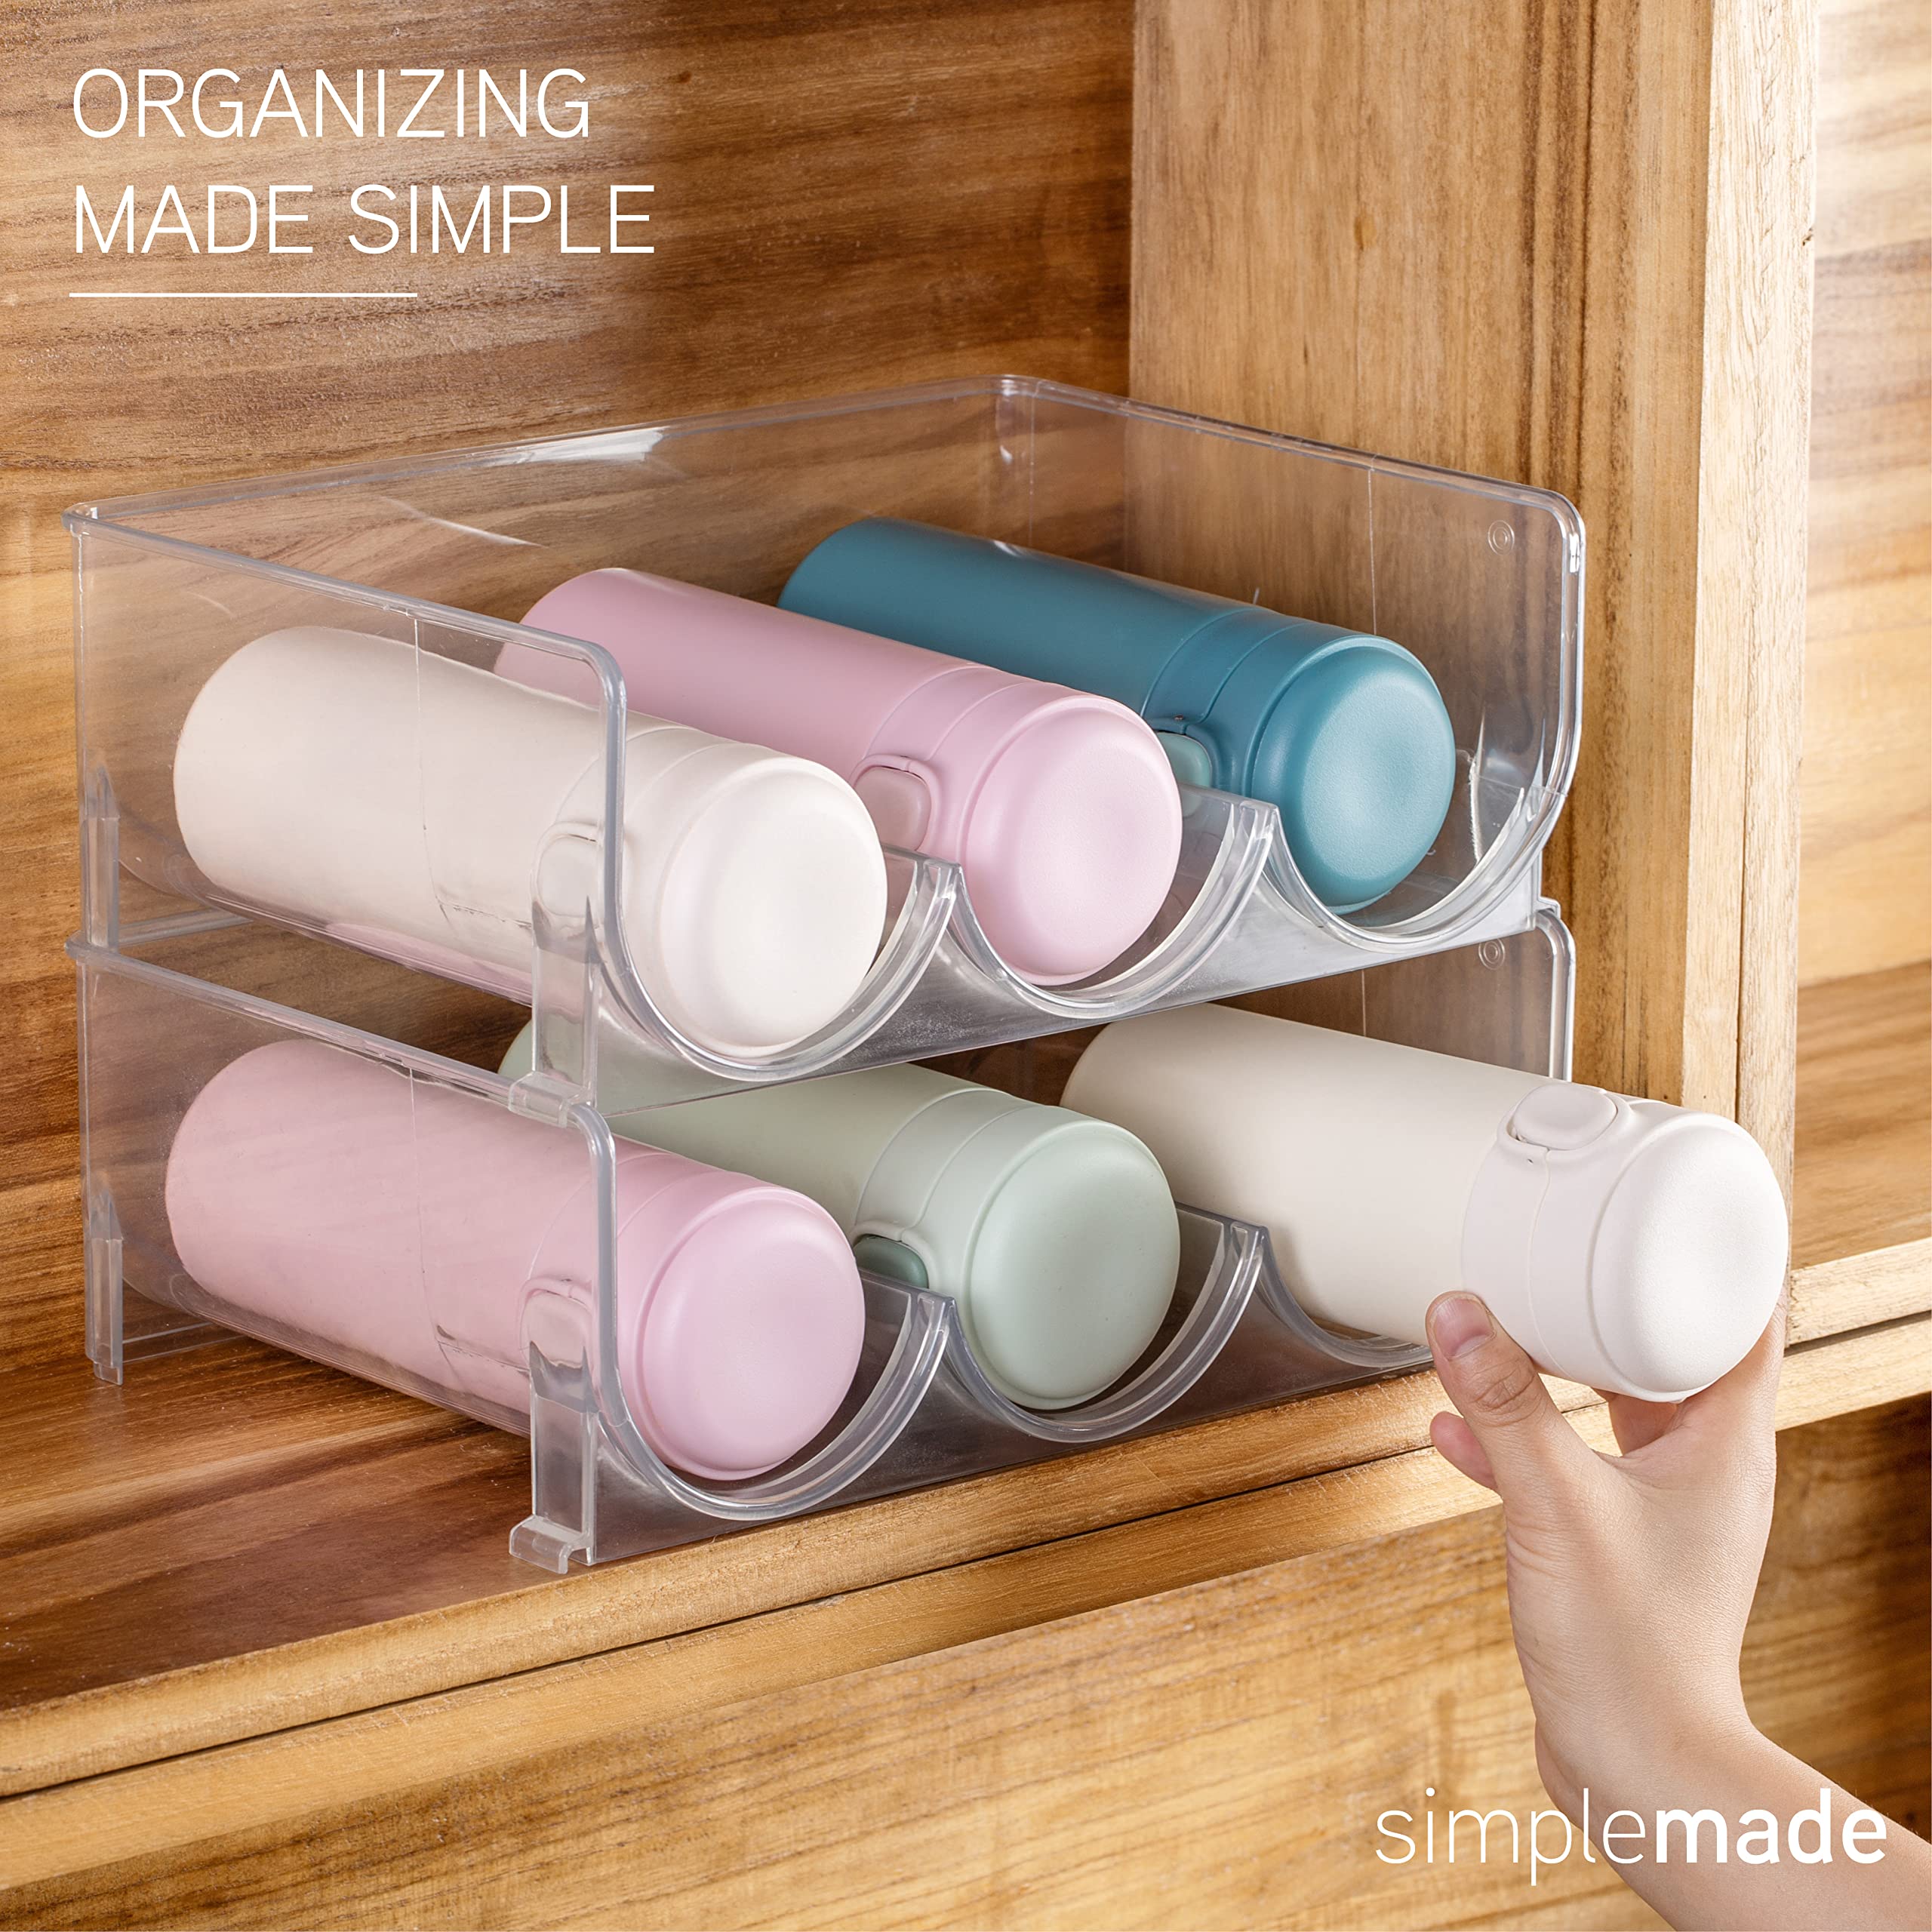 SIMPLEMADE Clear Water Bottle Organizer - Storage Holder for Kitchen Organization - Plastic Cup Rack Shelf for Insulated Tumbler Sports Flask Bottles Kids Water Bottle Travel Mug for Kitchen Cabinets  - Like New